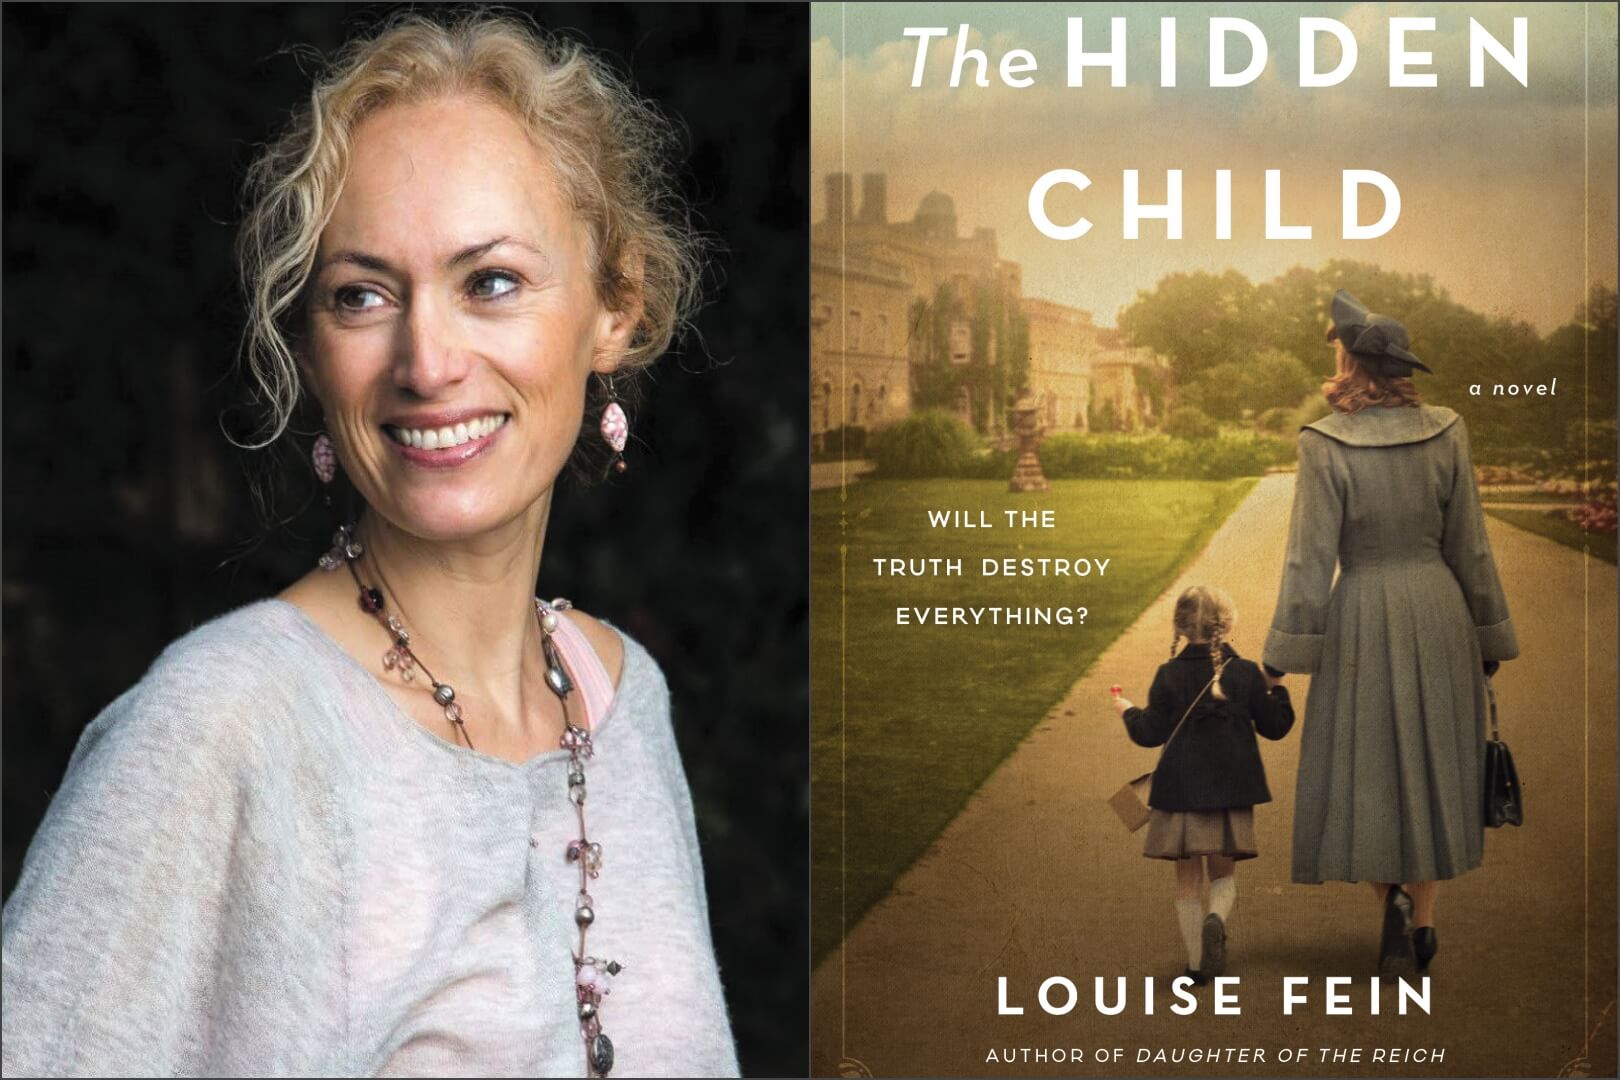 Q&A with Louise Fein, Author of The Hidden Child